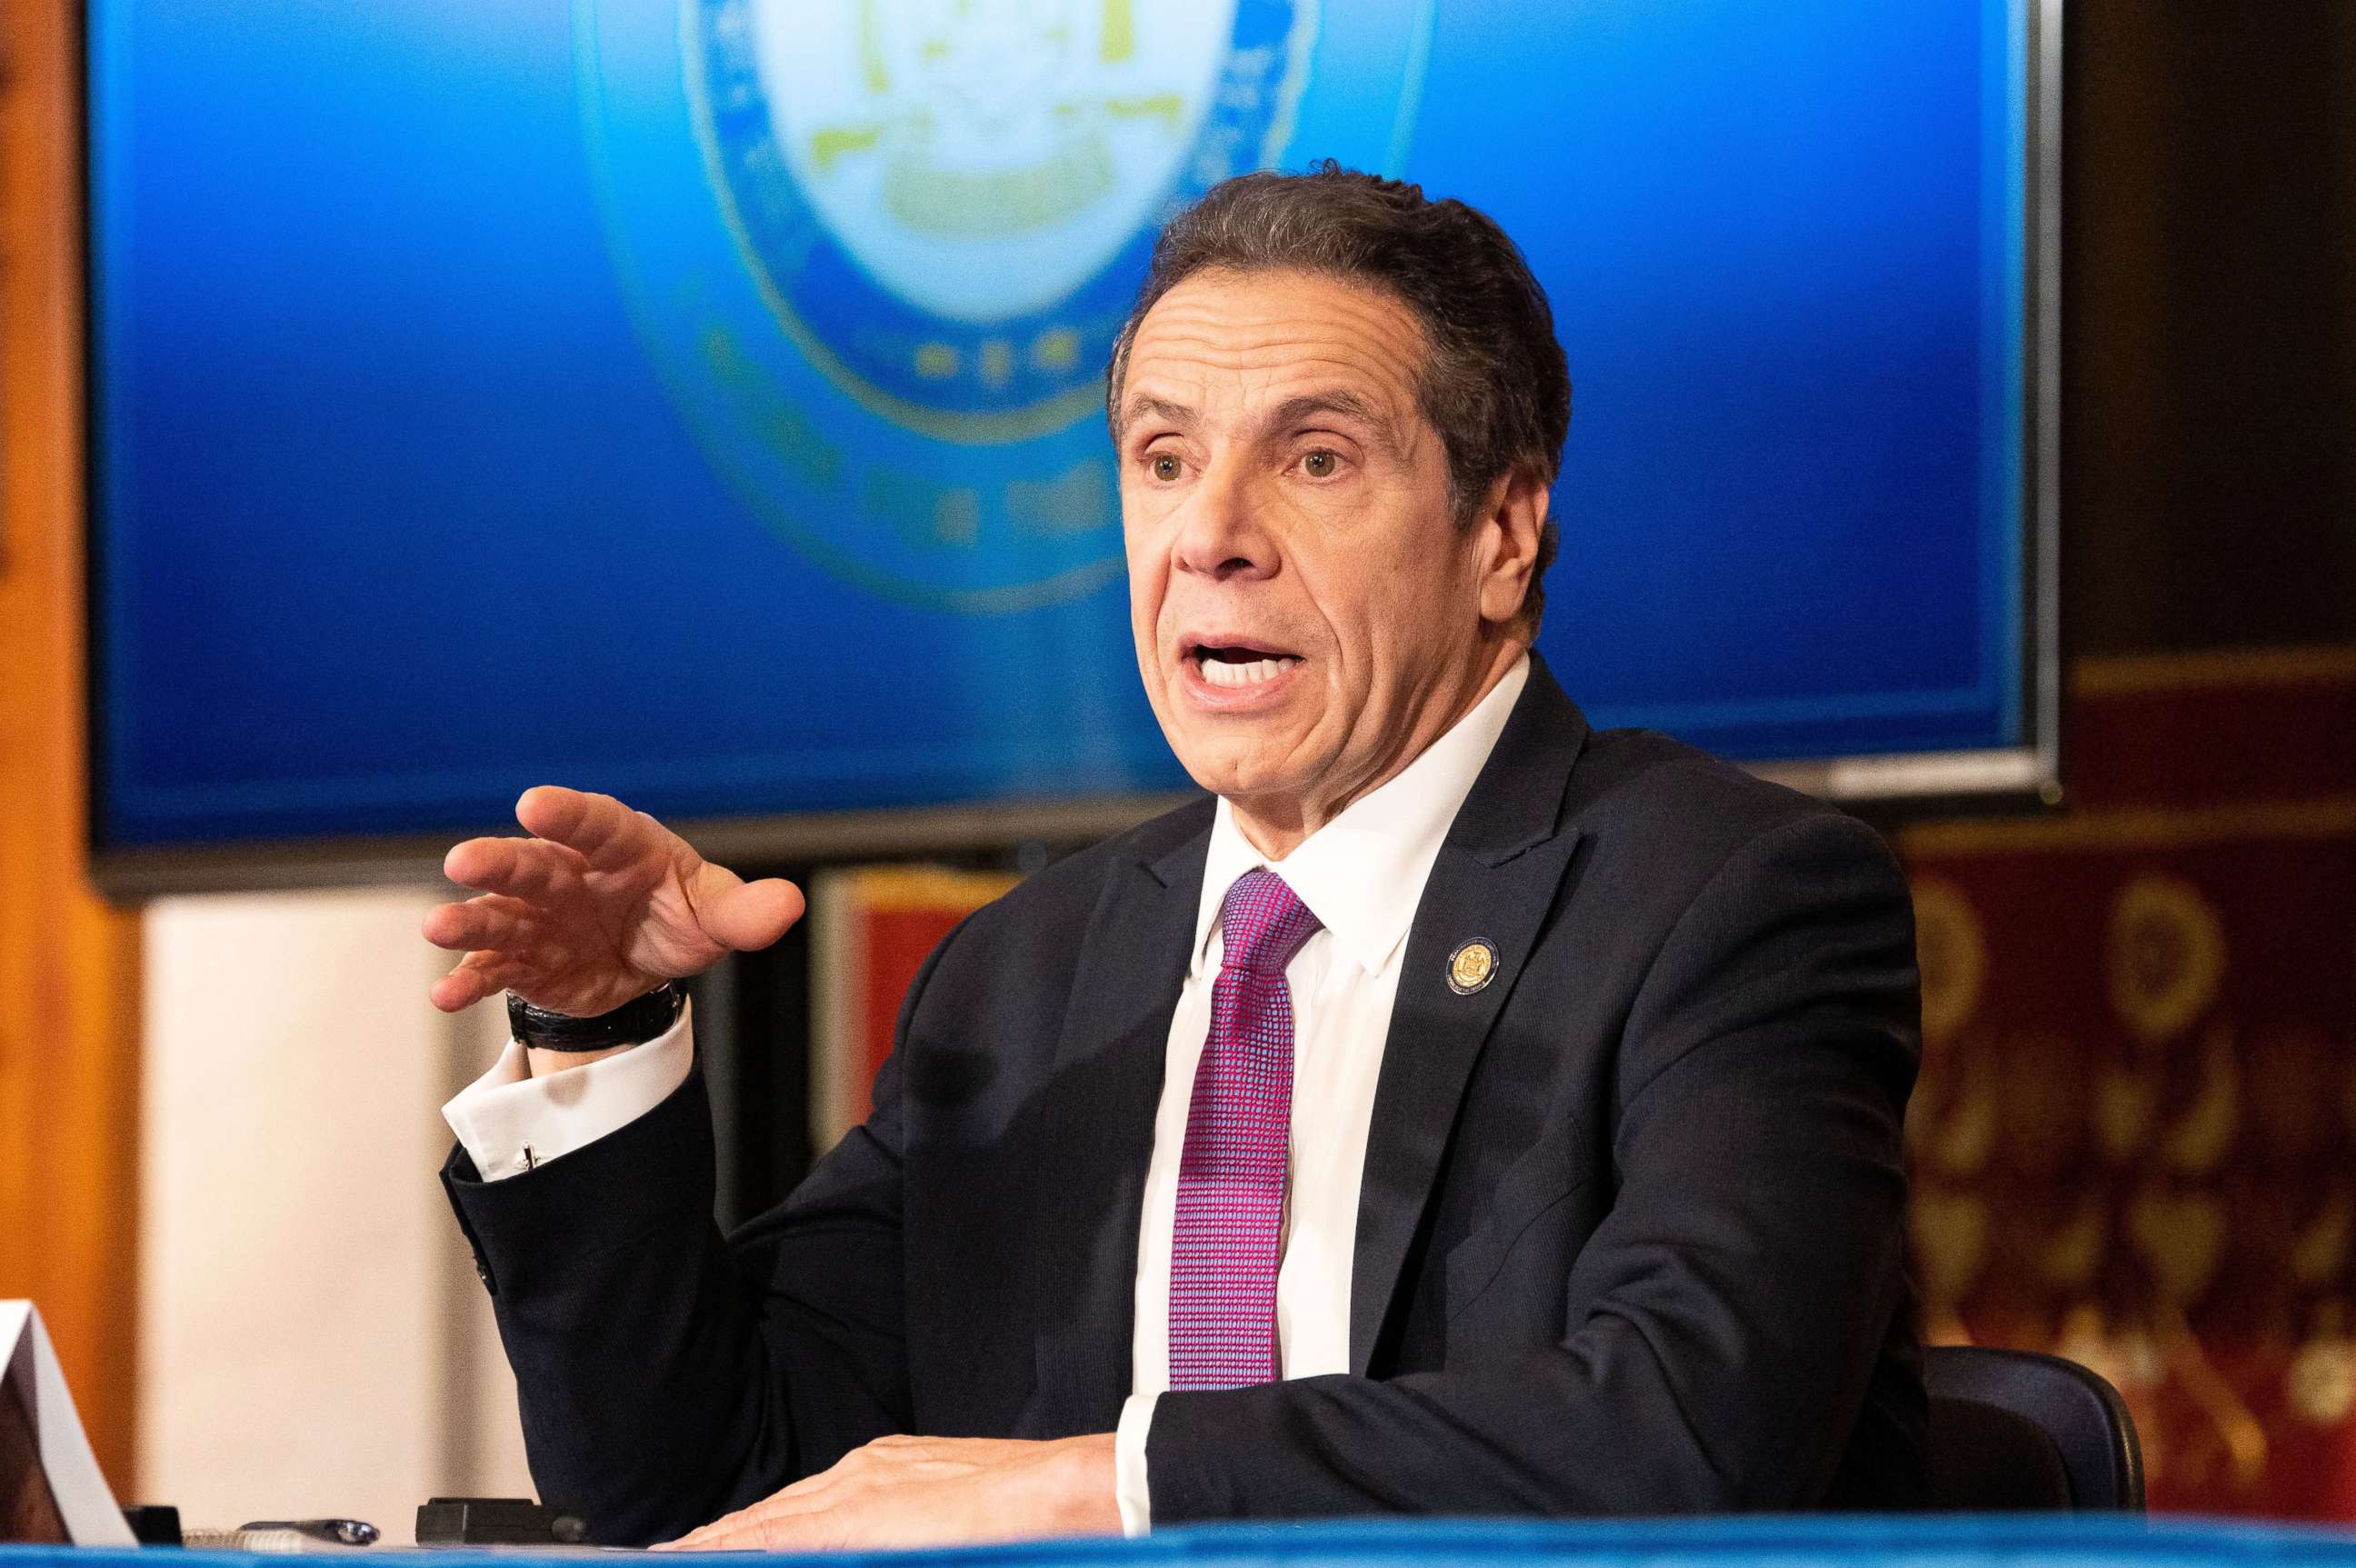 PHOTO: New York Governor Andrew Cuomo speaks during a press Conference at the State Capitol in Albany, New York, April 20, 2020.